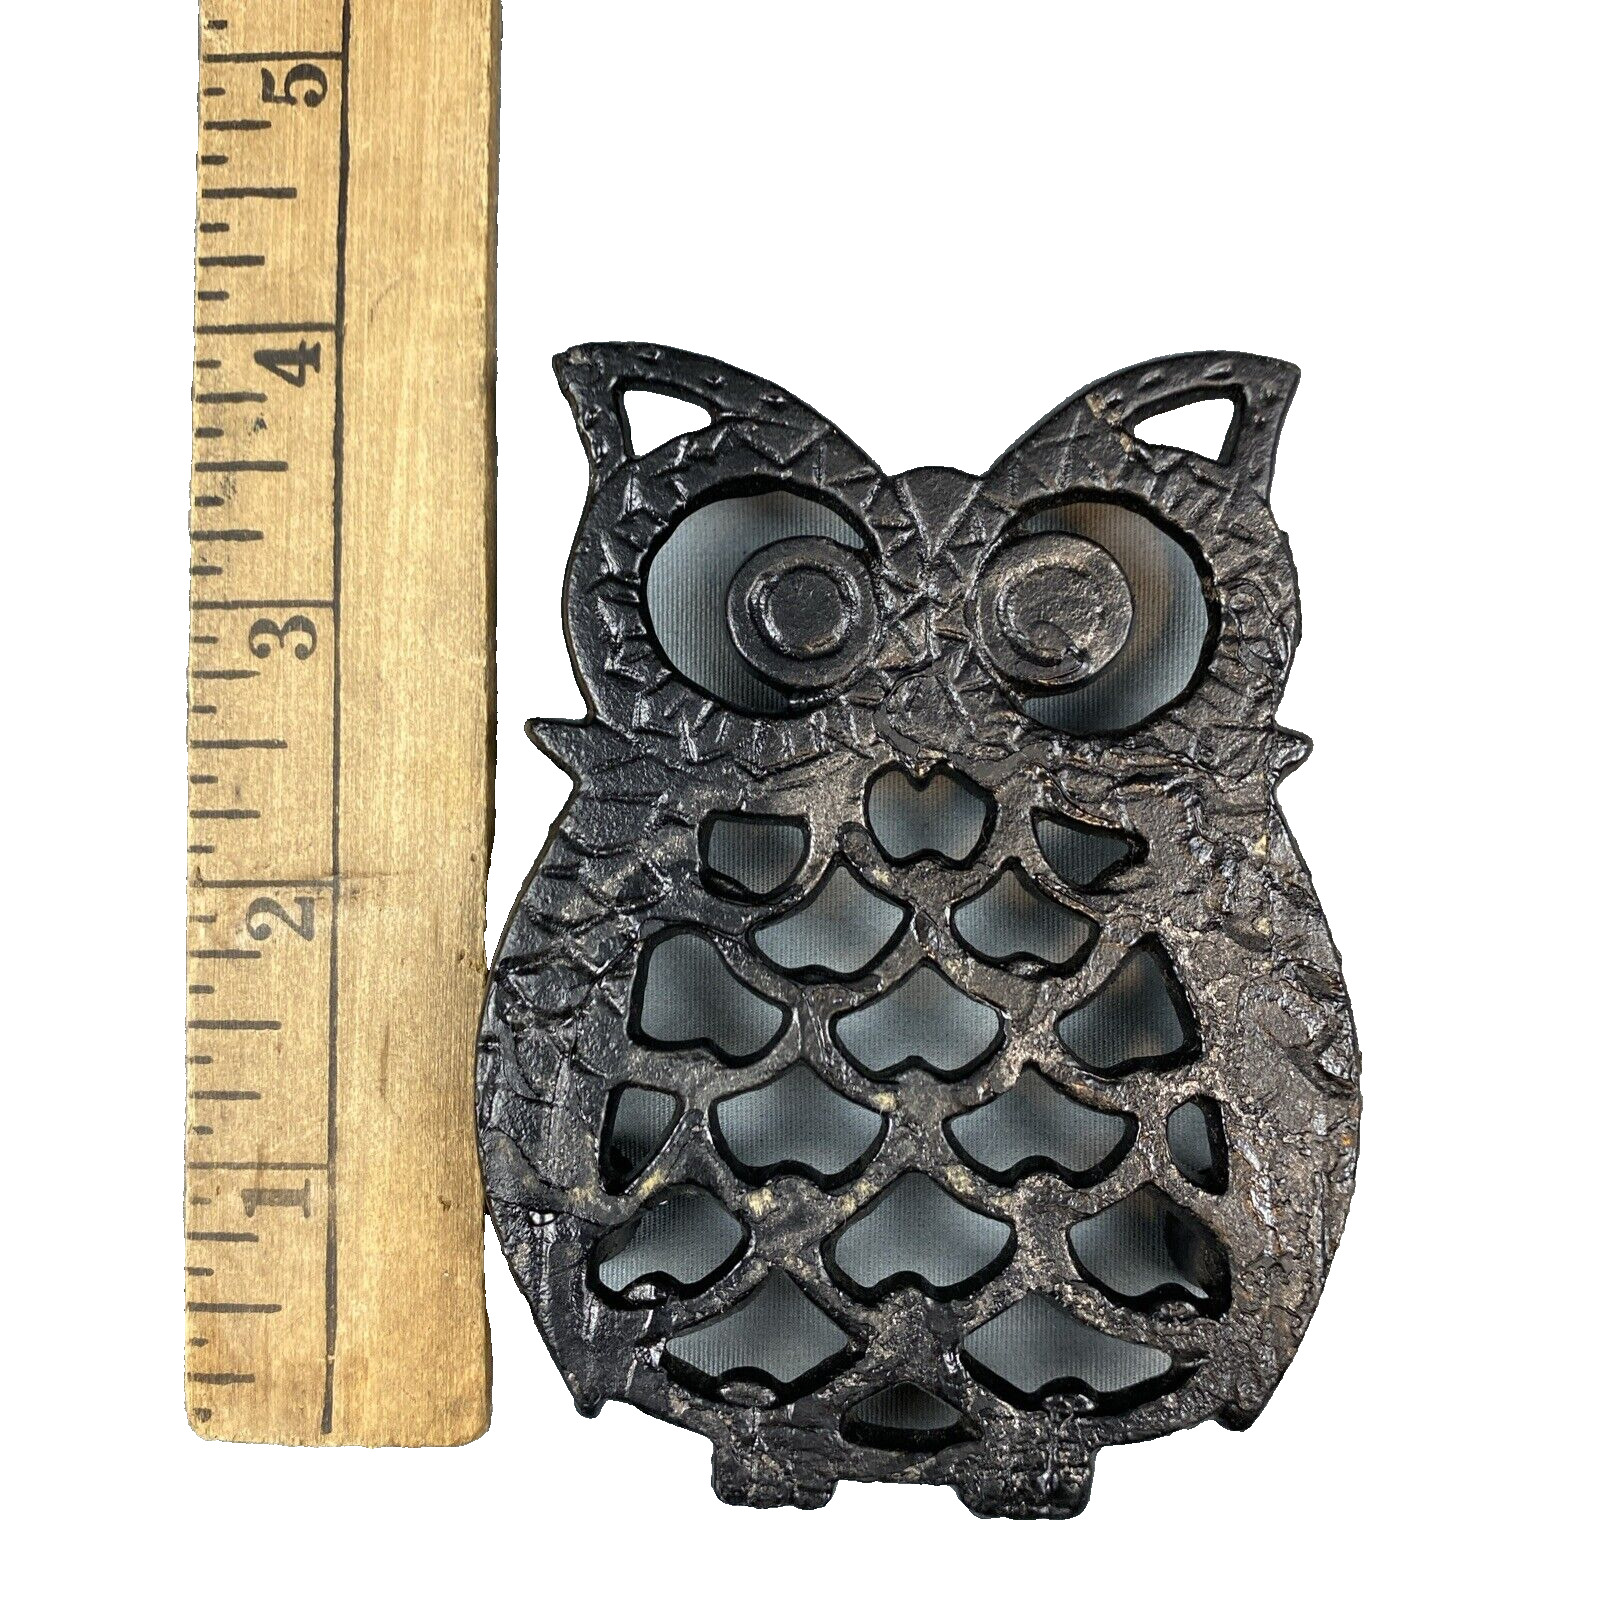 Small Vintage Cast Iron Owl Trivet Coaster Decoration Made In Taiwan